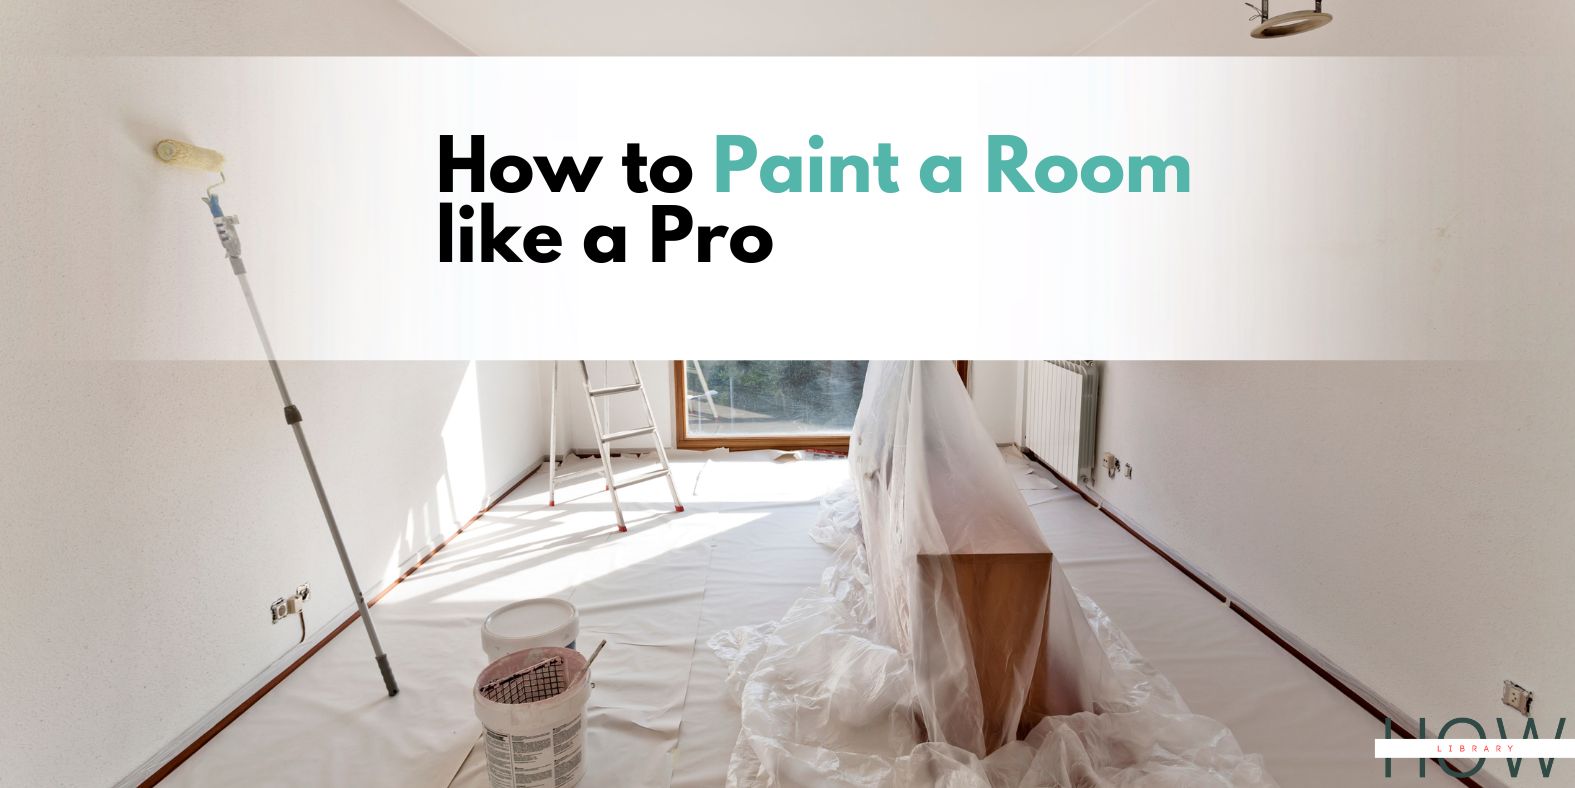 How to Paint a Room like a Pro